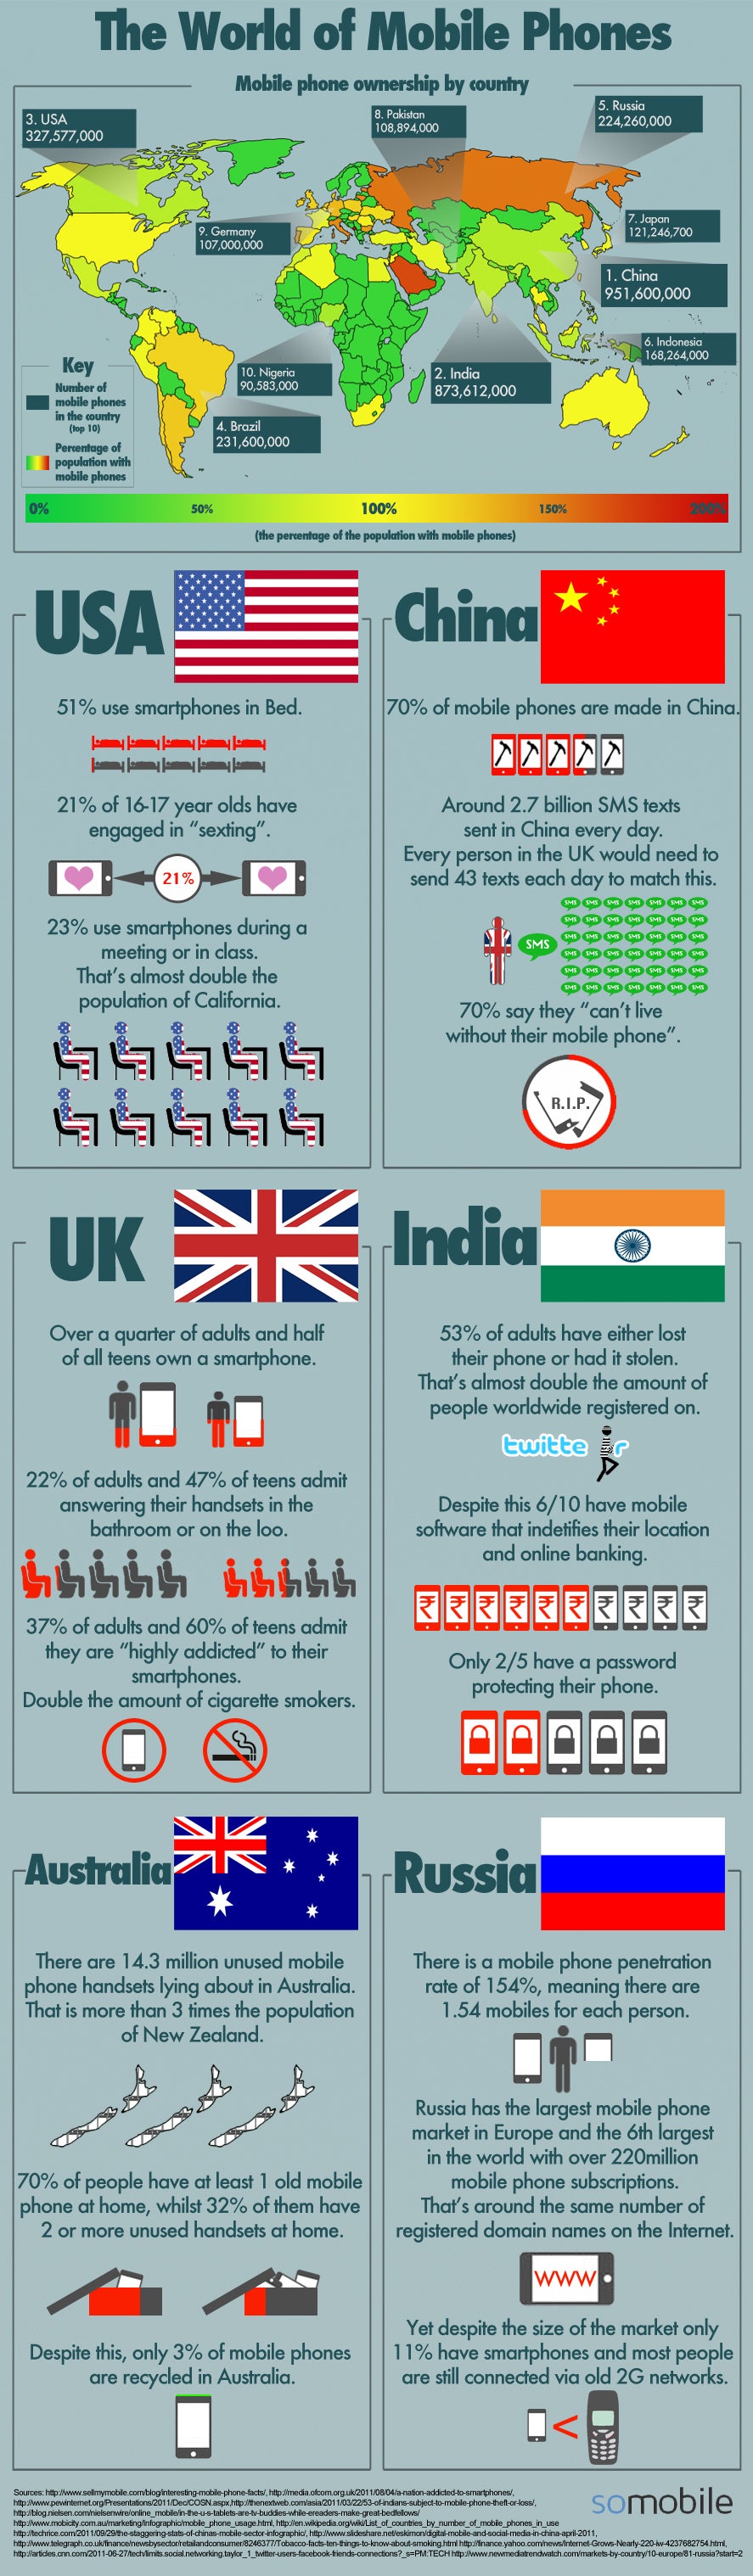 The weird mobile phone habits detailed by country (infographic)